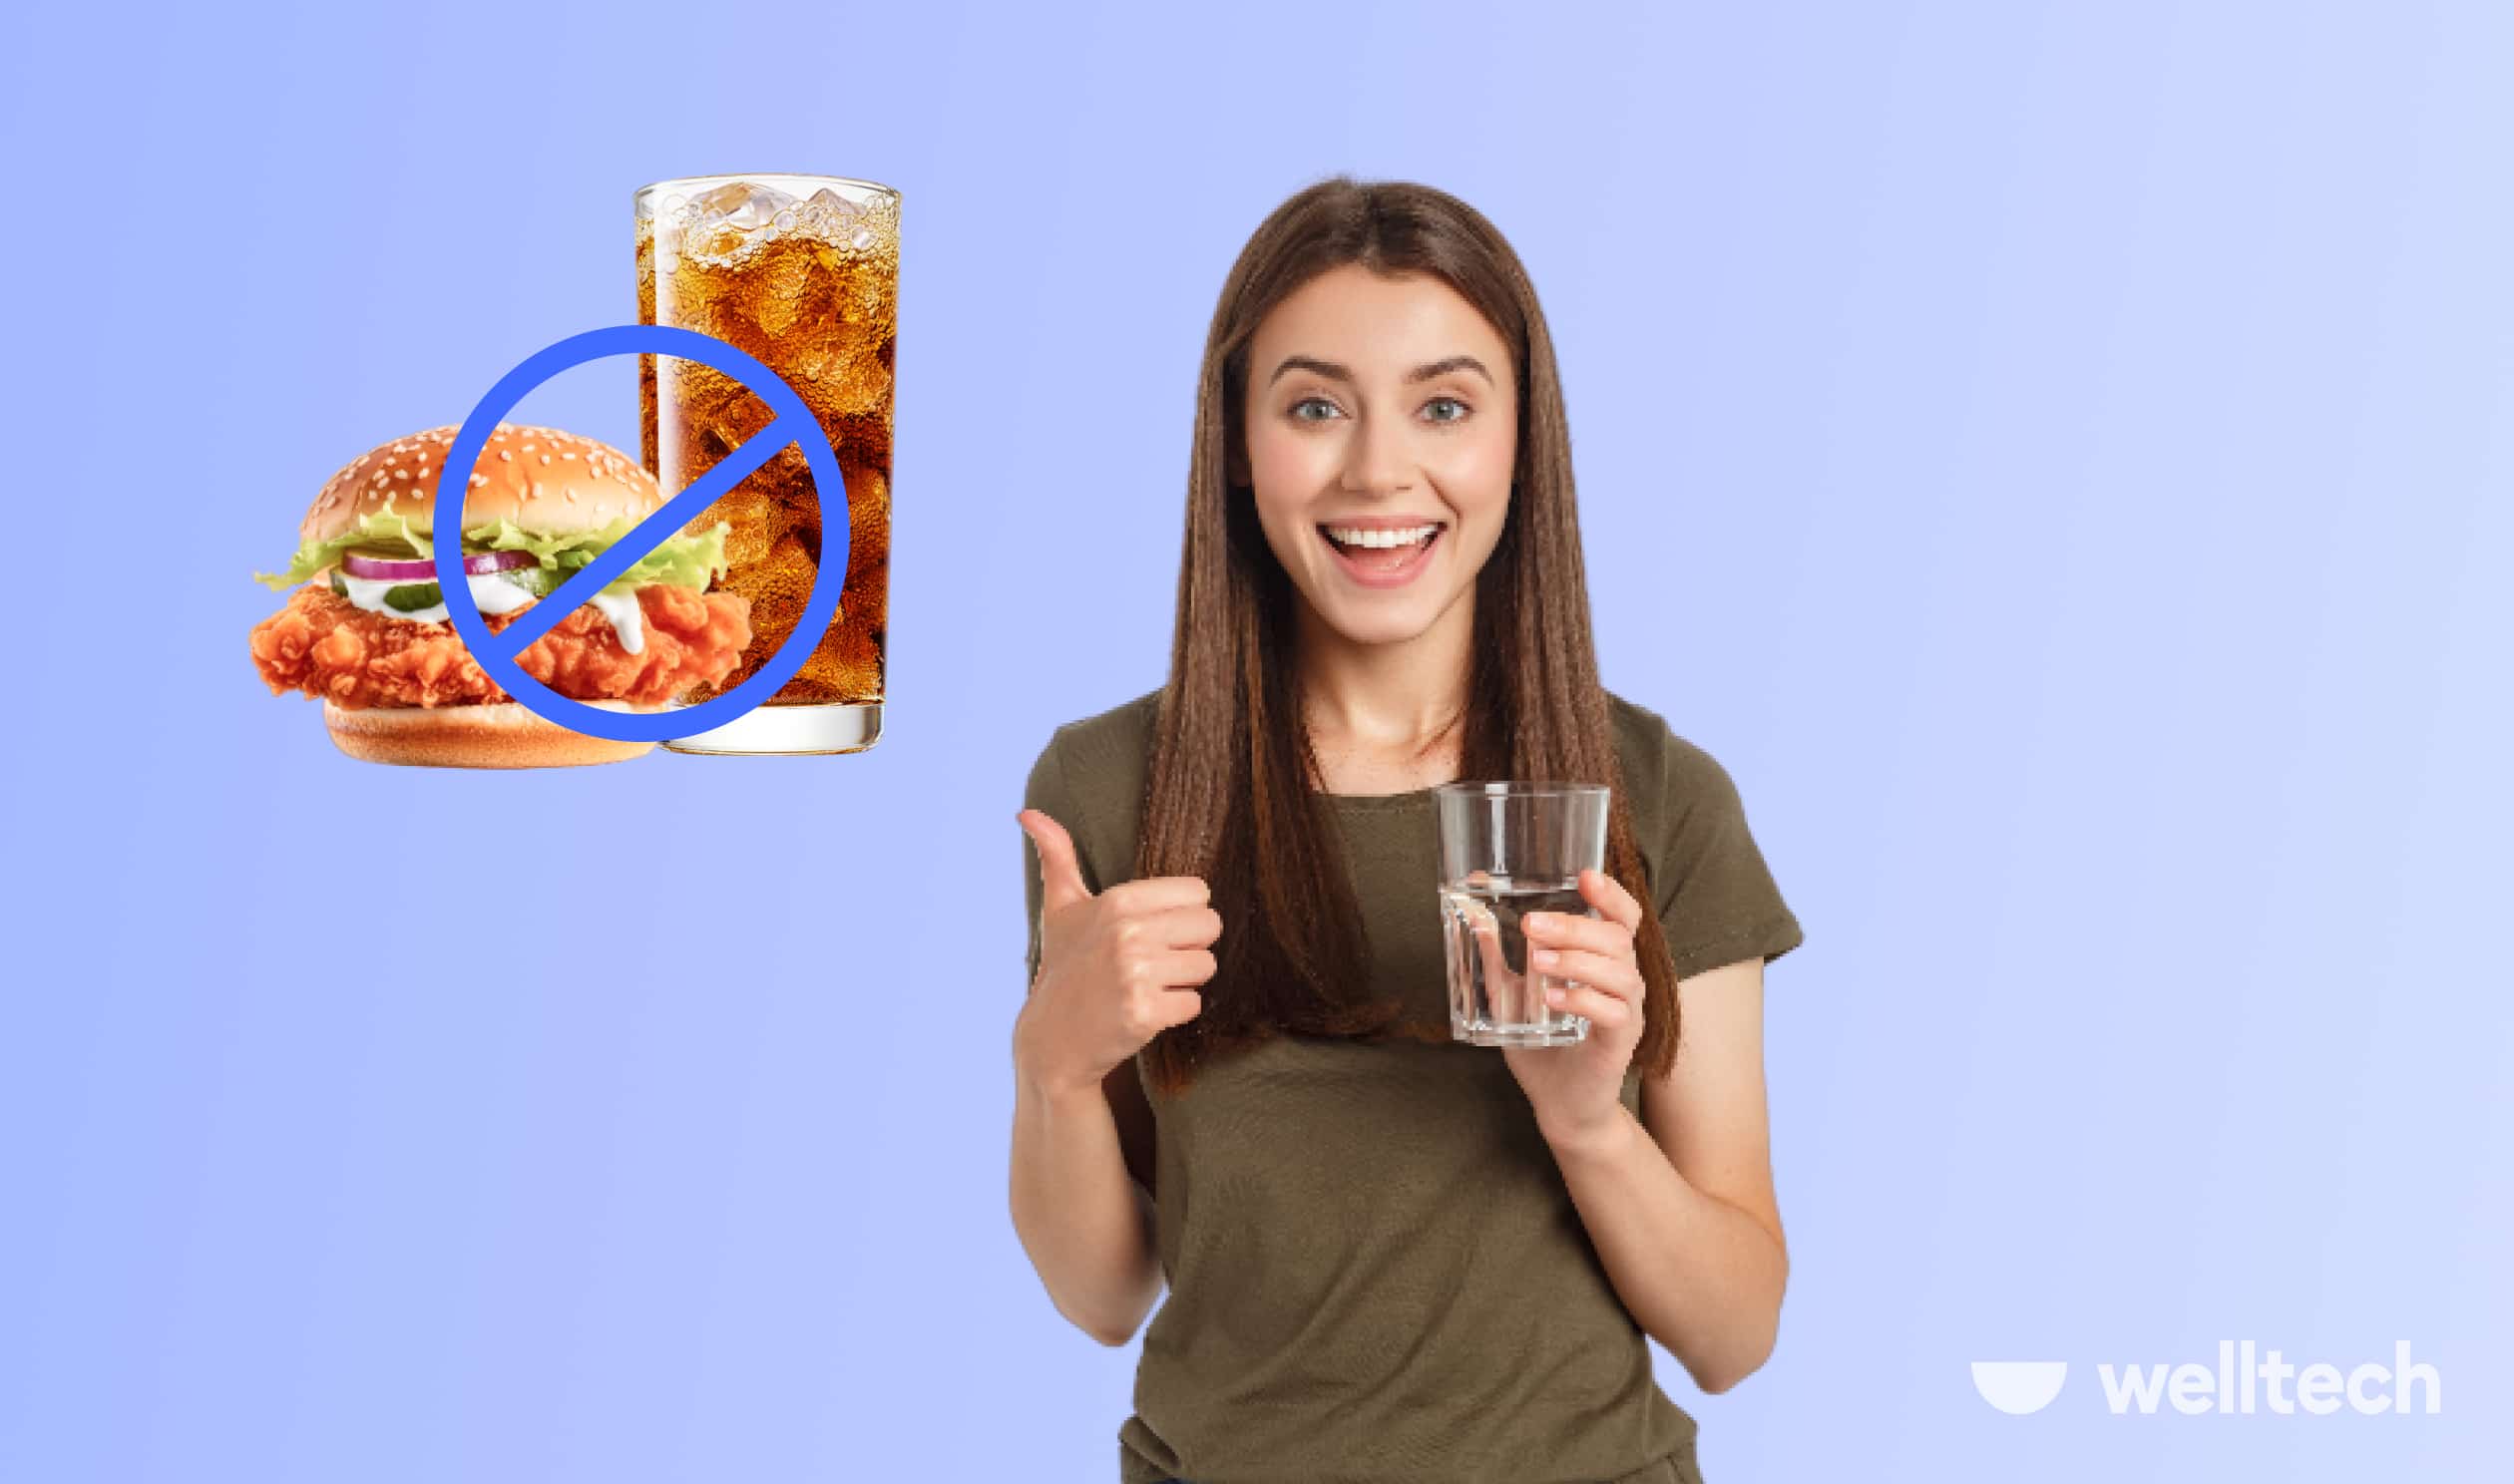 a woman is holding a glass full of water, smiling, holding thumbs up, junk food like burgers and coke is crossed in the background, water fasting